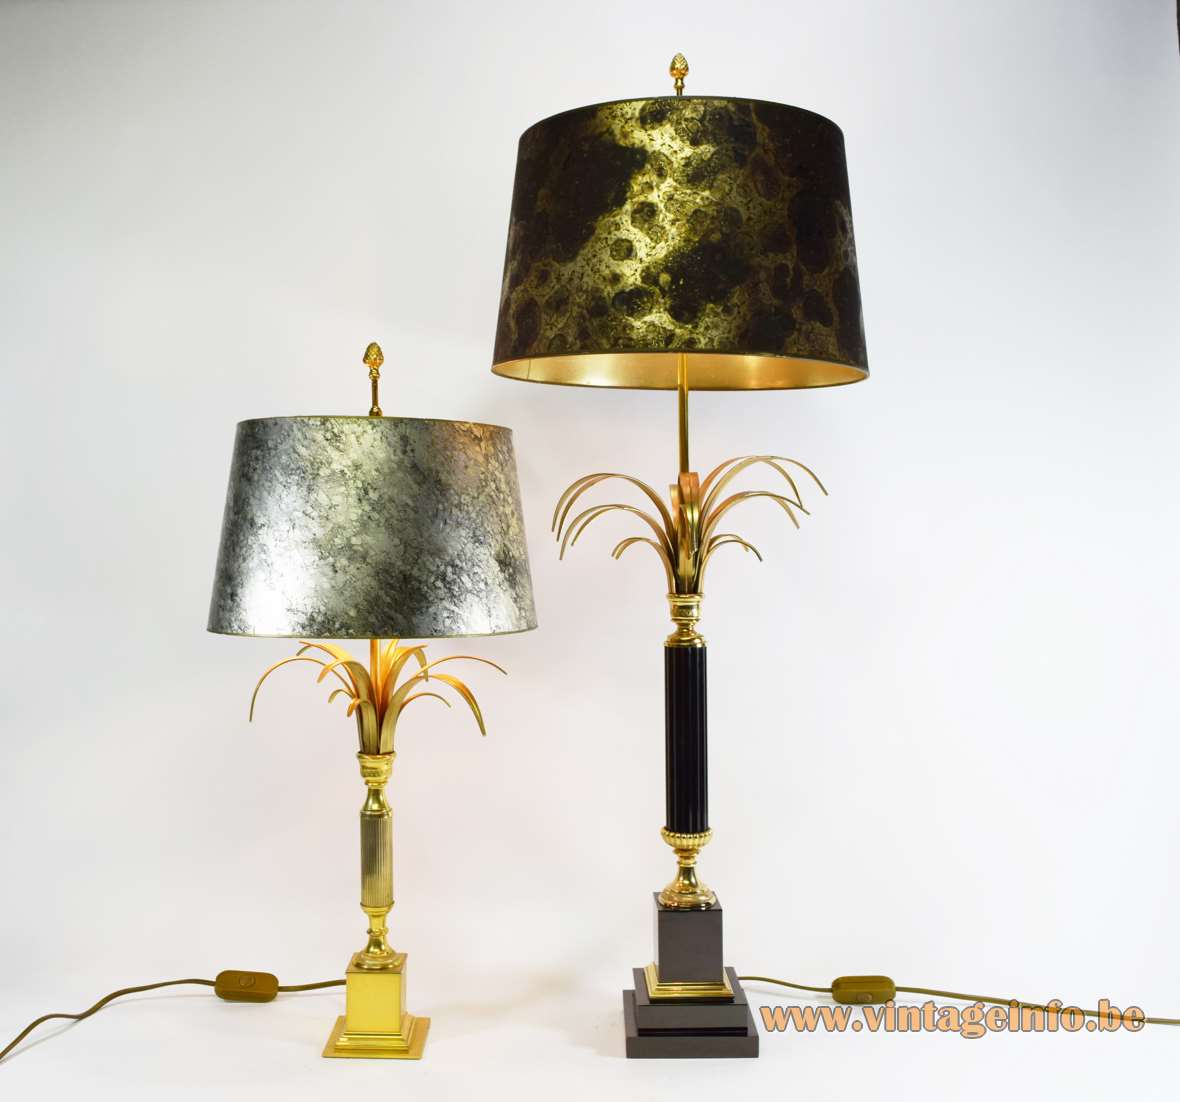 Boulanger palm table lamps square brass base & leaves ribbed chrome rod conical lampshade 1970s 1980s Belgium